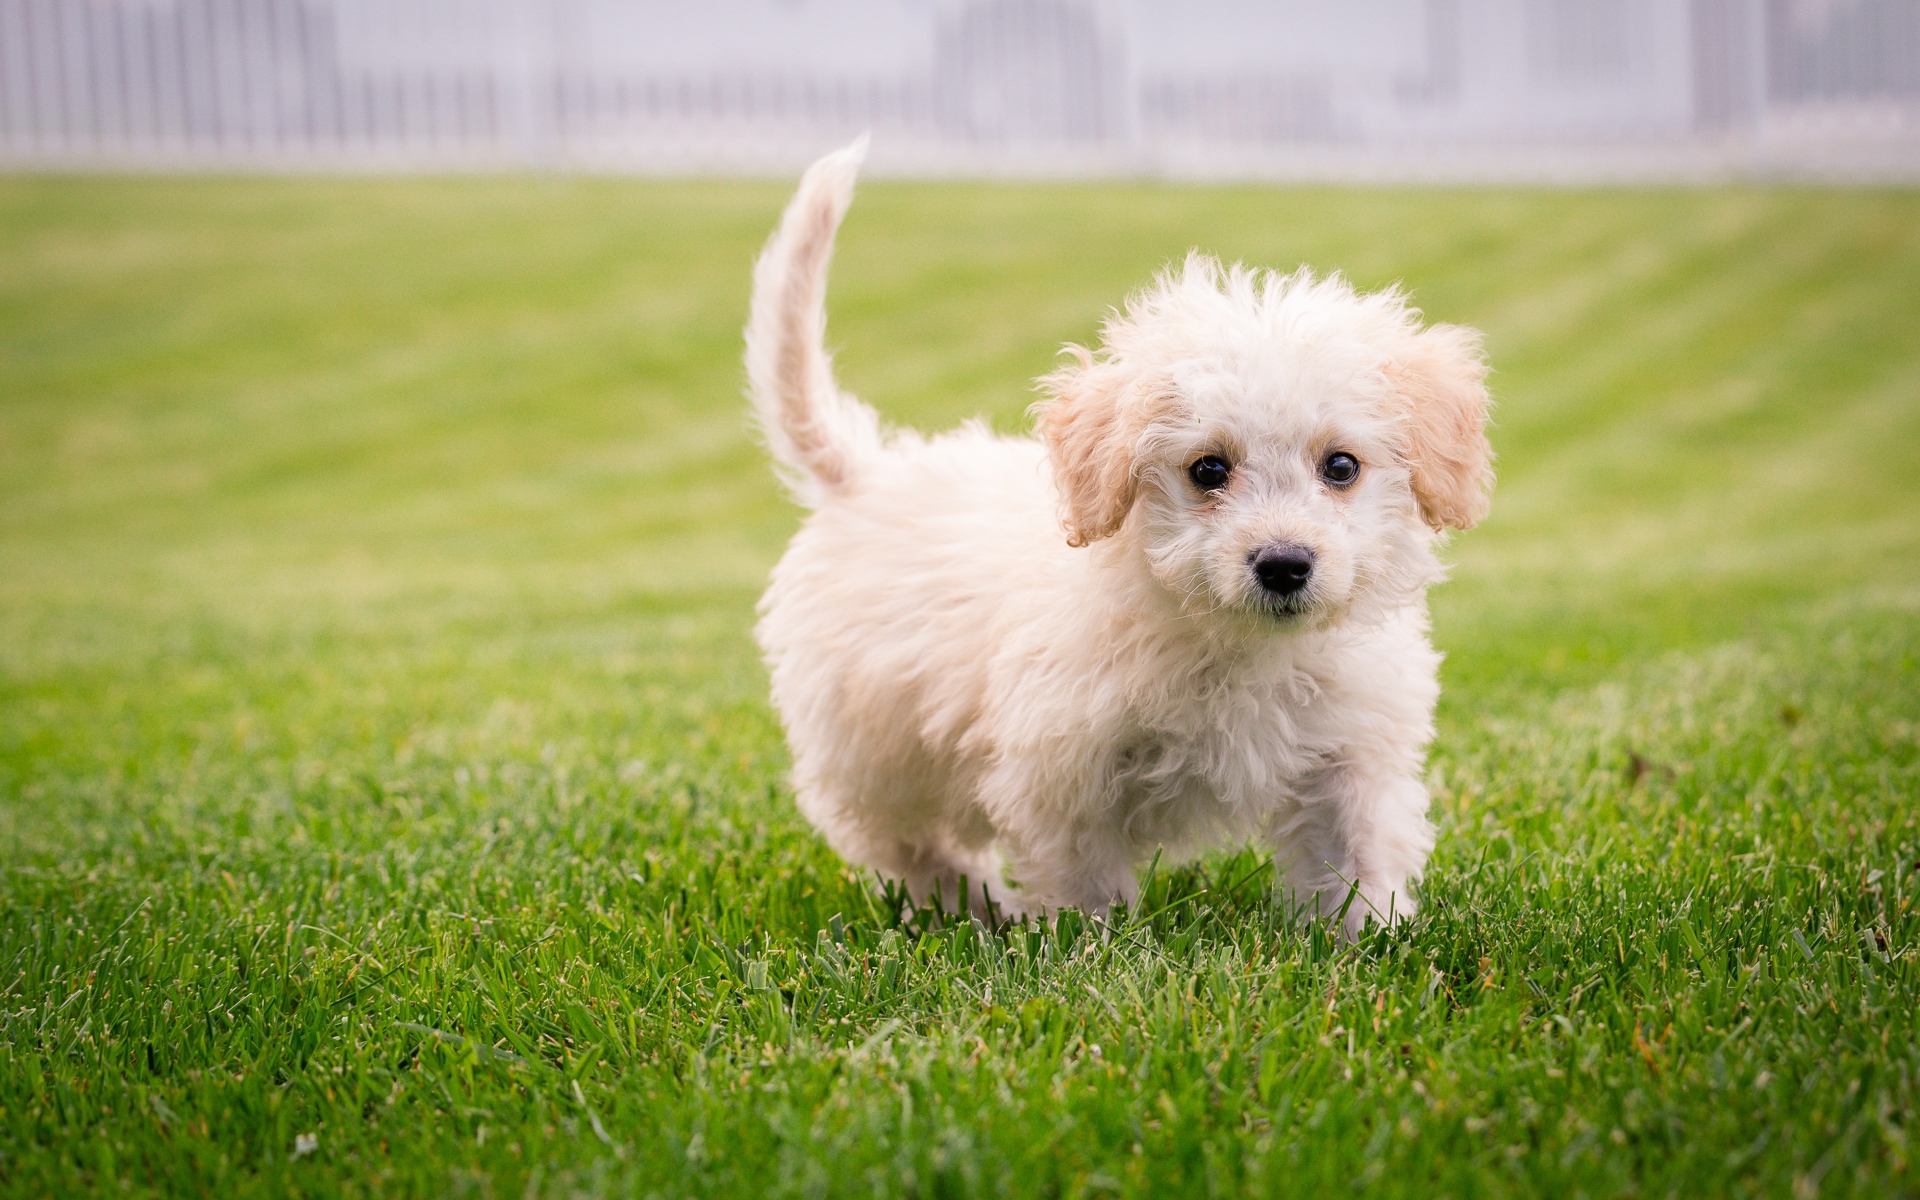 Small white fluffy puppy on a green lawn